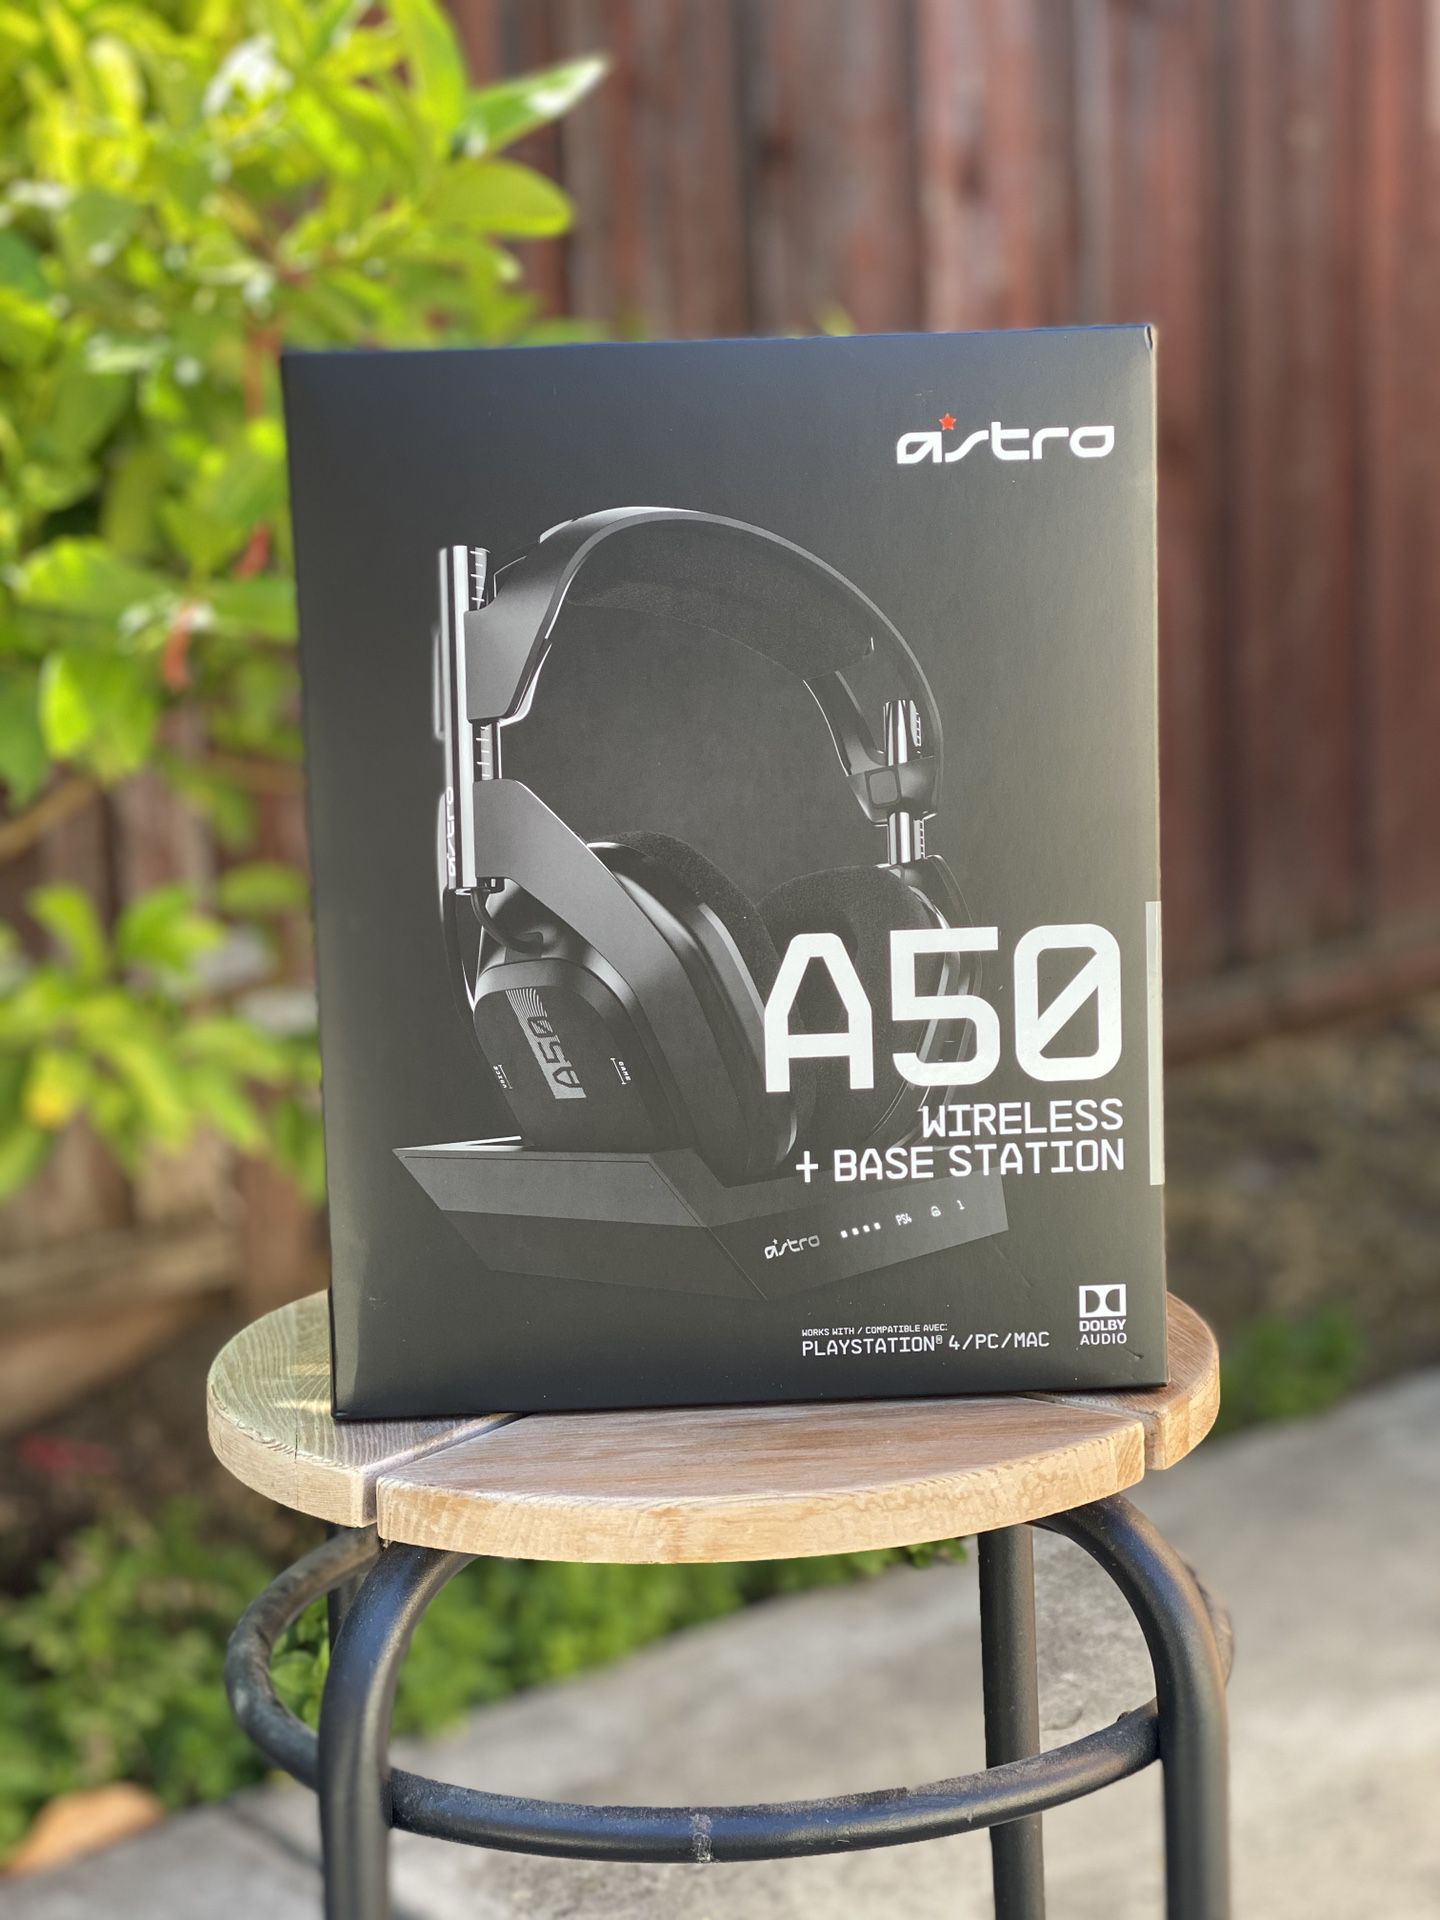 Astro A50 Wireless + Base Station for PS4/PC - Brand New/Sealed